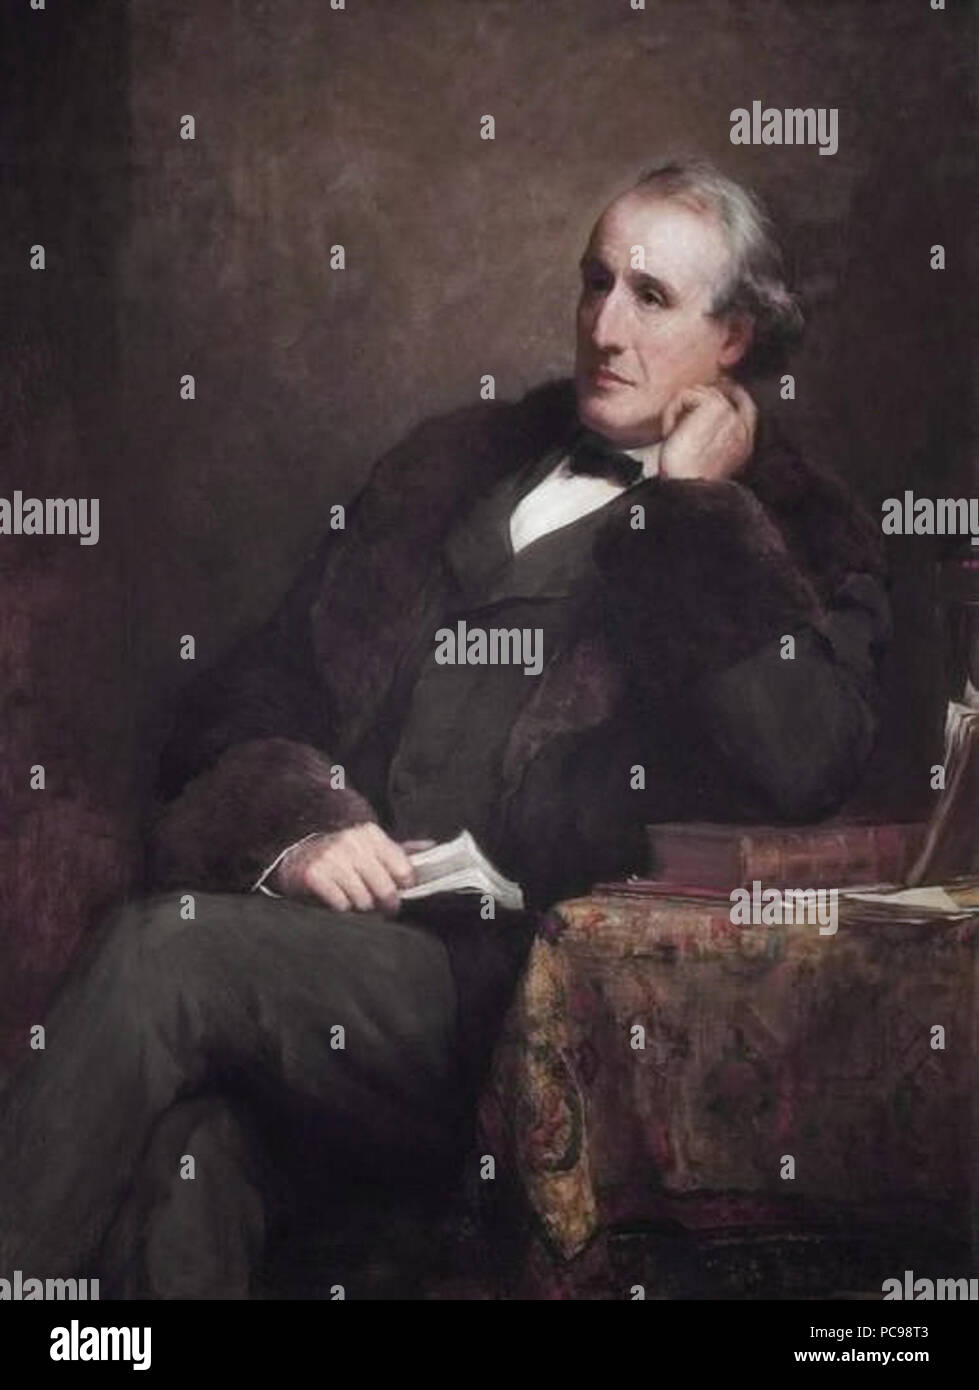 William Scovell Savory (1826–1895), Surgeon at St Bartholomew's Hospital  *oil on canvas,  *127 x 112 cm  *1893 650 William Scovell Savory, by Walter William Ouless Stock Photo